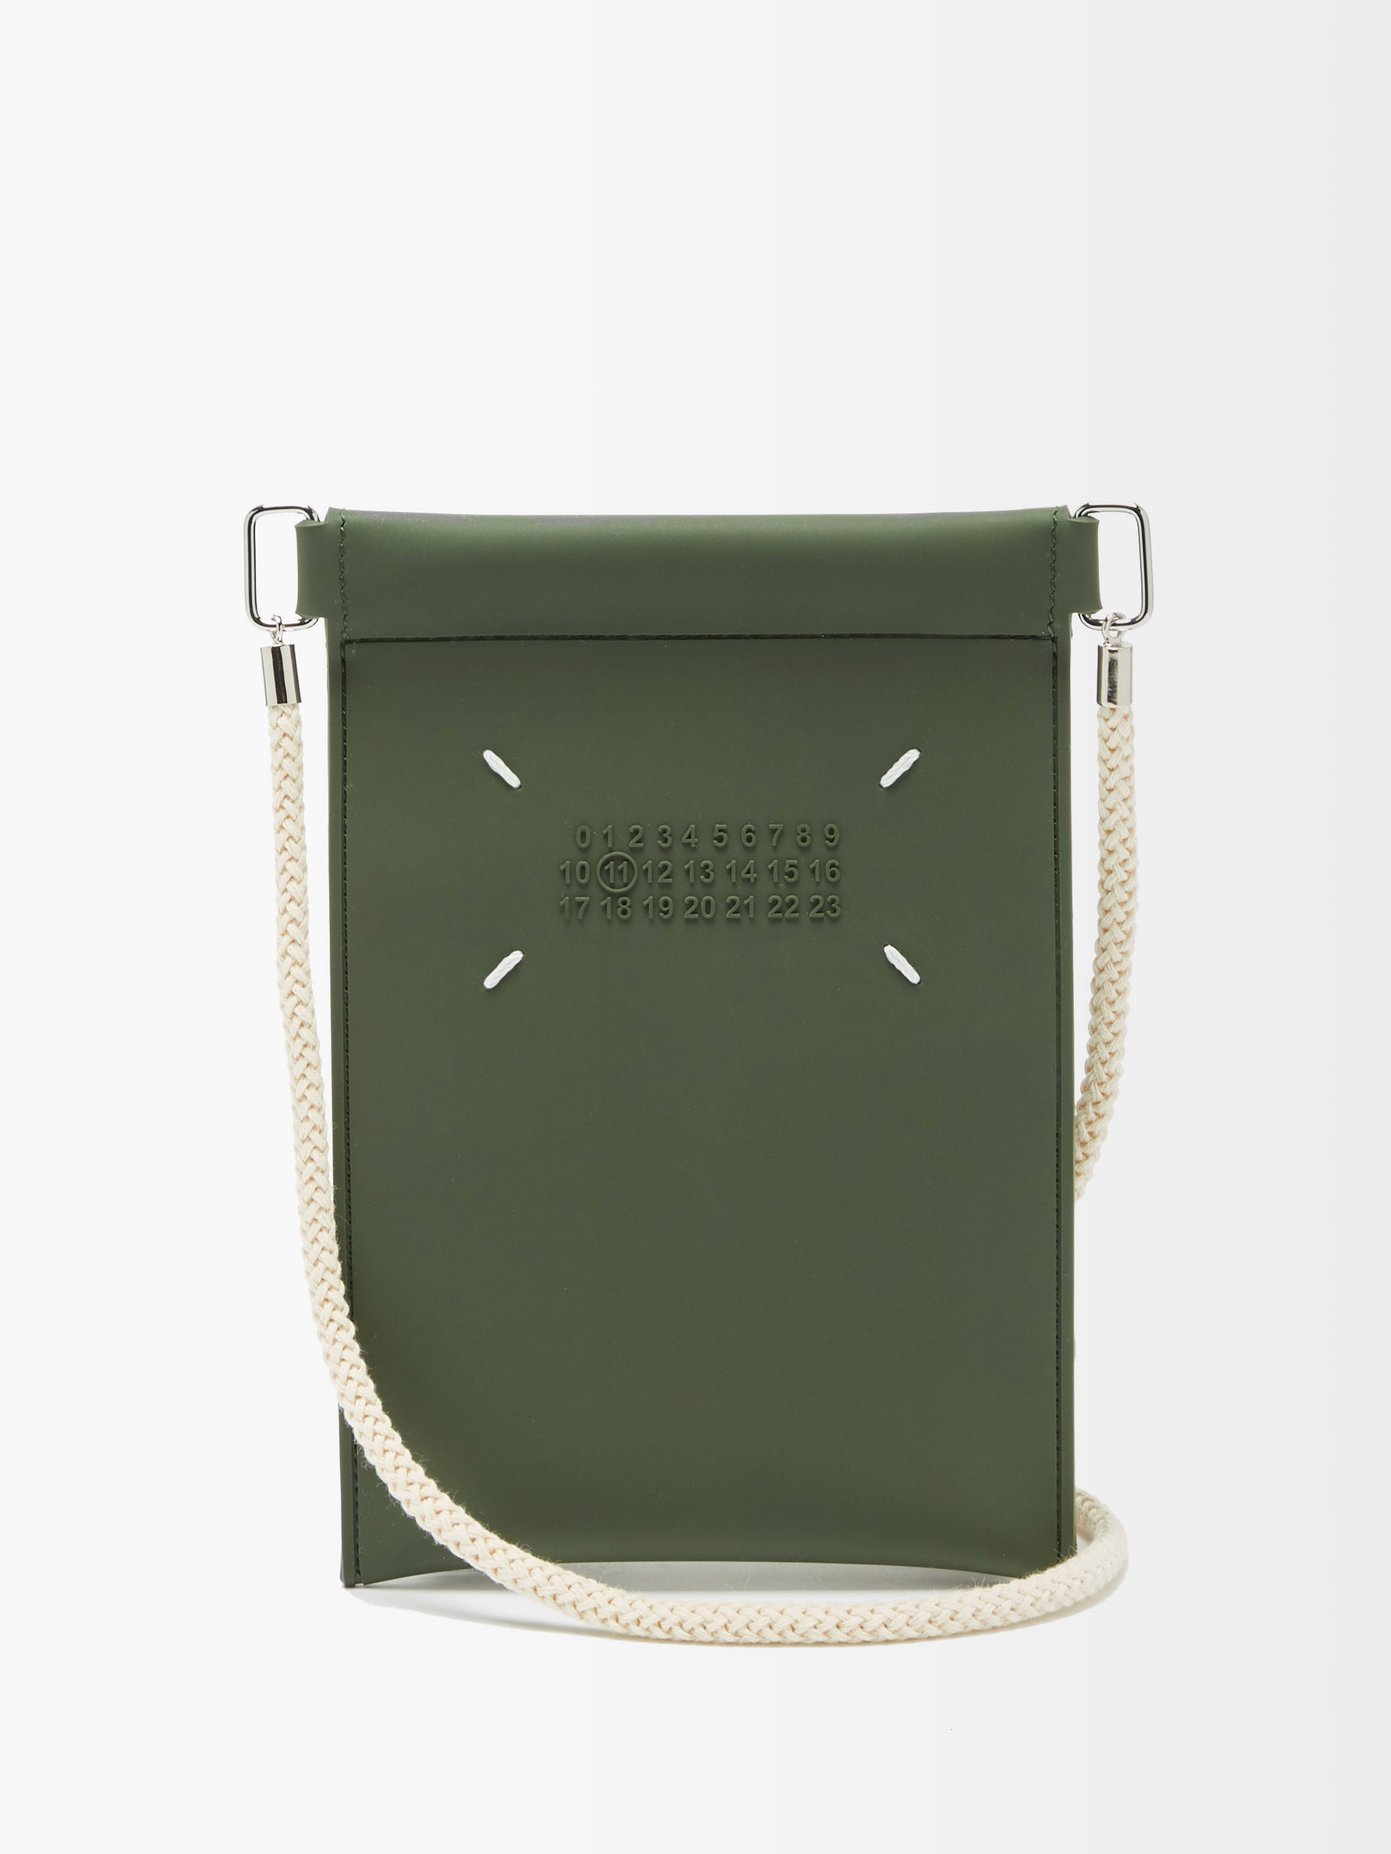 22SS 메종 마르지엘라 4스티치 크로스바디 파우치 Maison Margiela Green Four Stitches faux-leather cross-body pouch